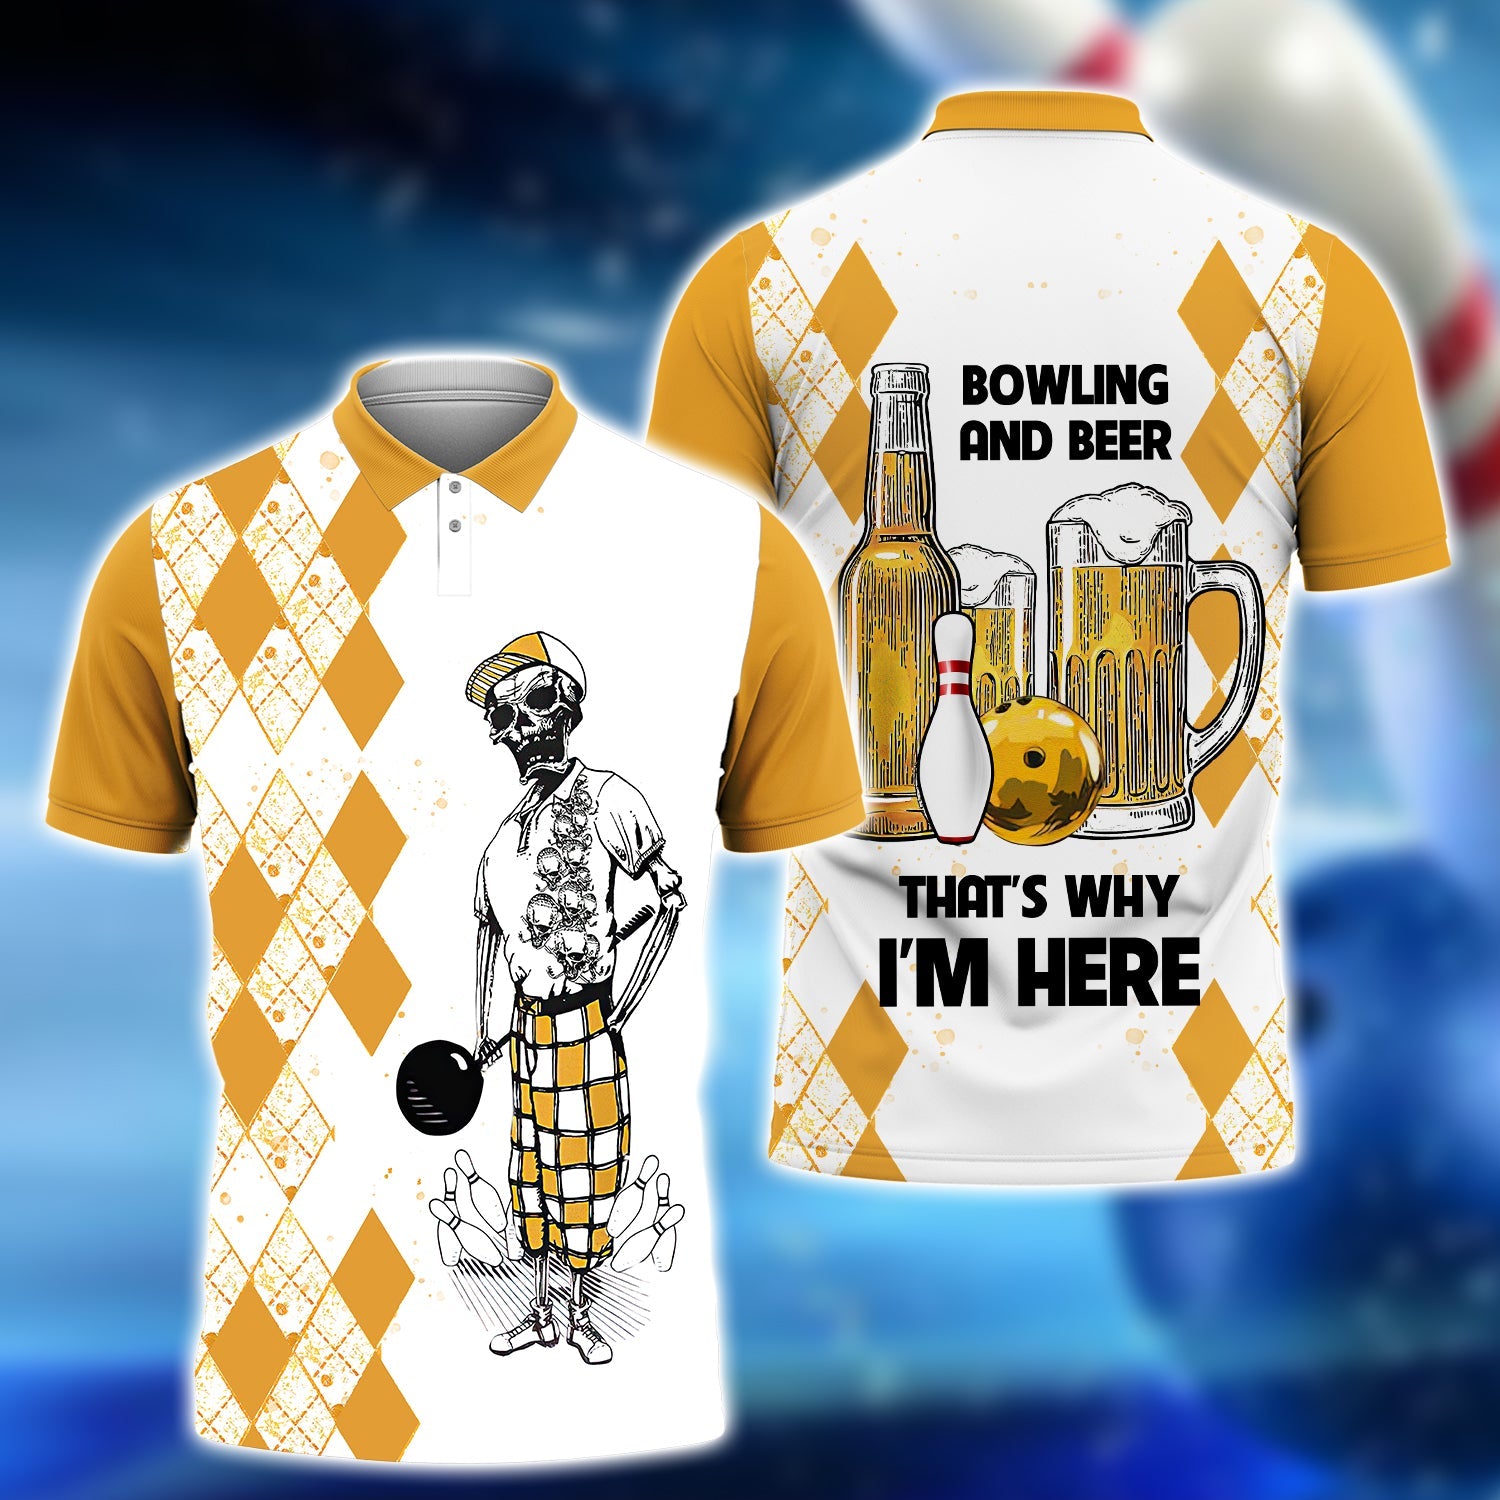 Bowling Men Polo Shirt - Bowling And Beer That's Why I'm Here Bowling Polo Shirt - Perfect Gift For Friend, Family